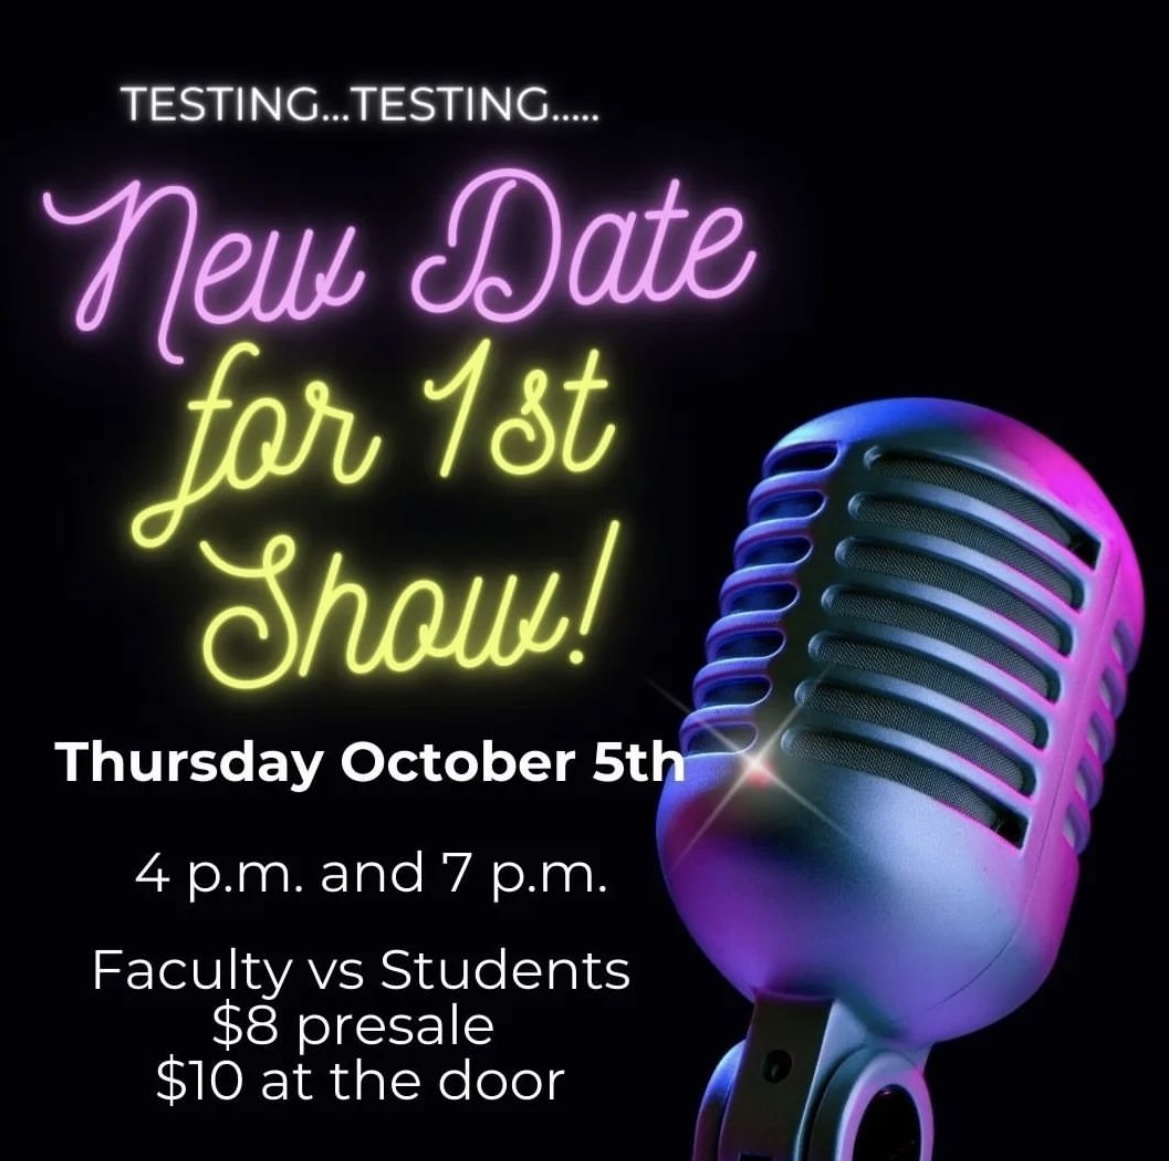 Be sure to check out the improv show this Thursday!